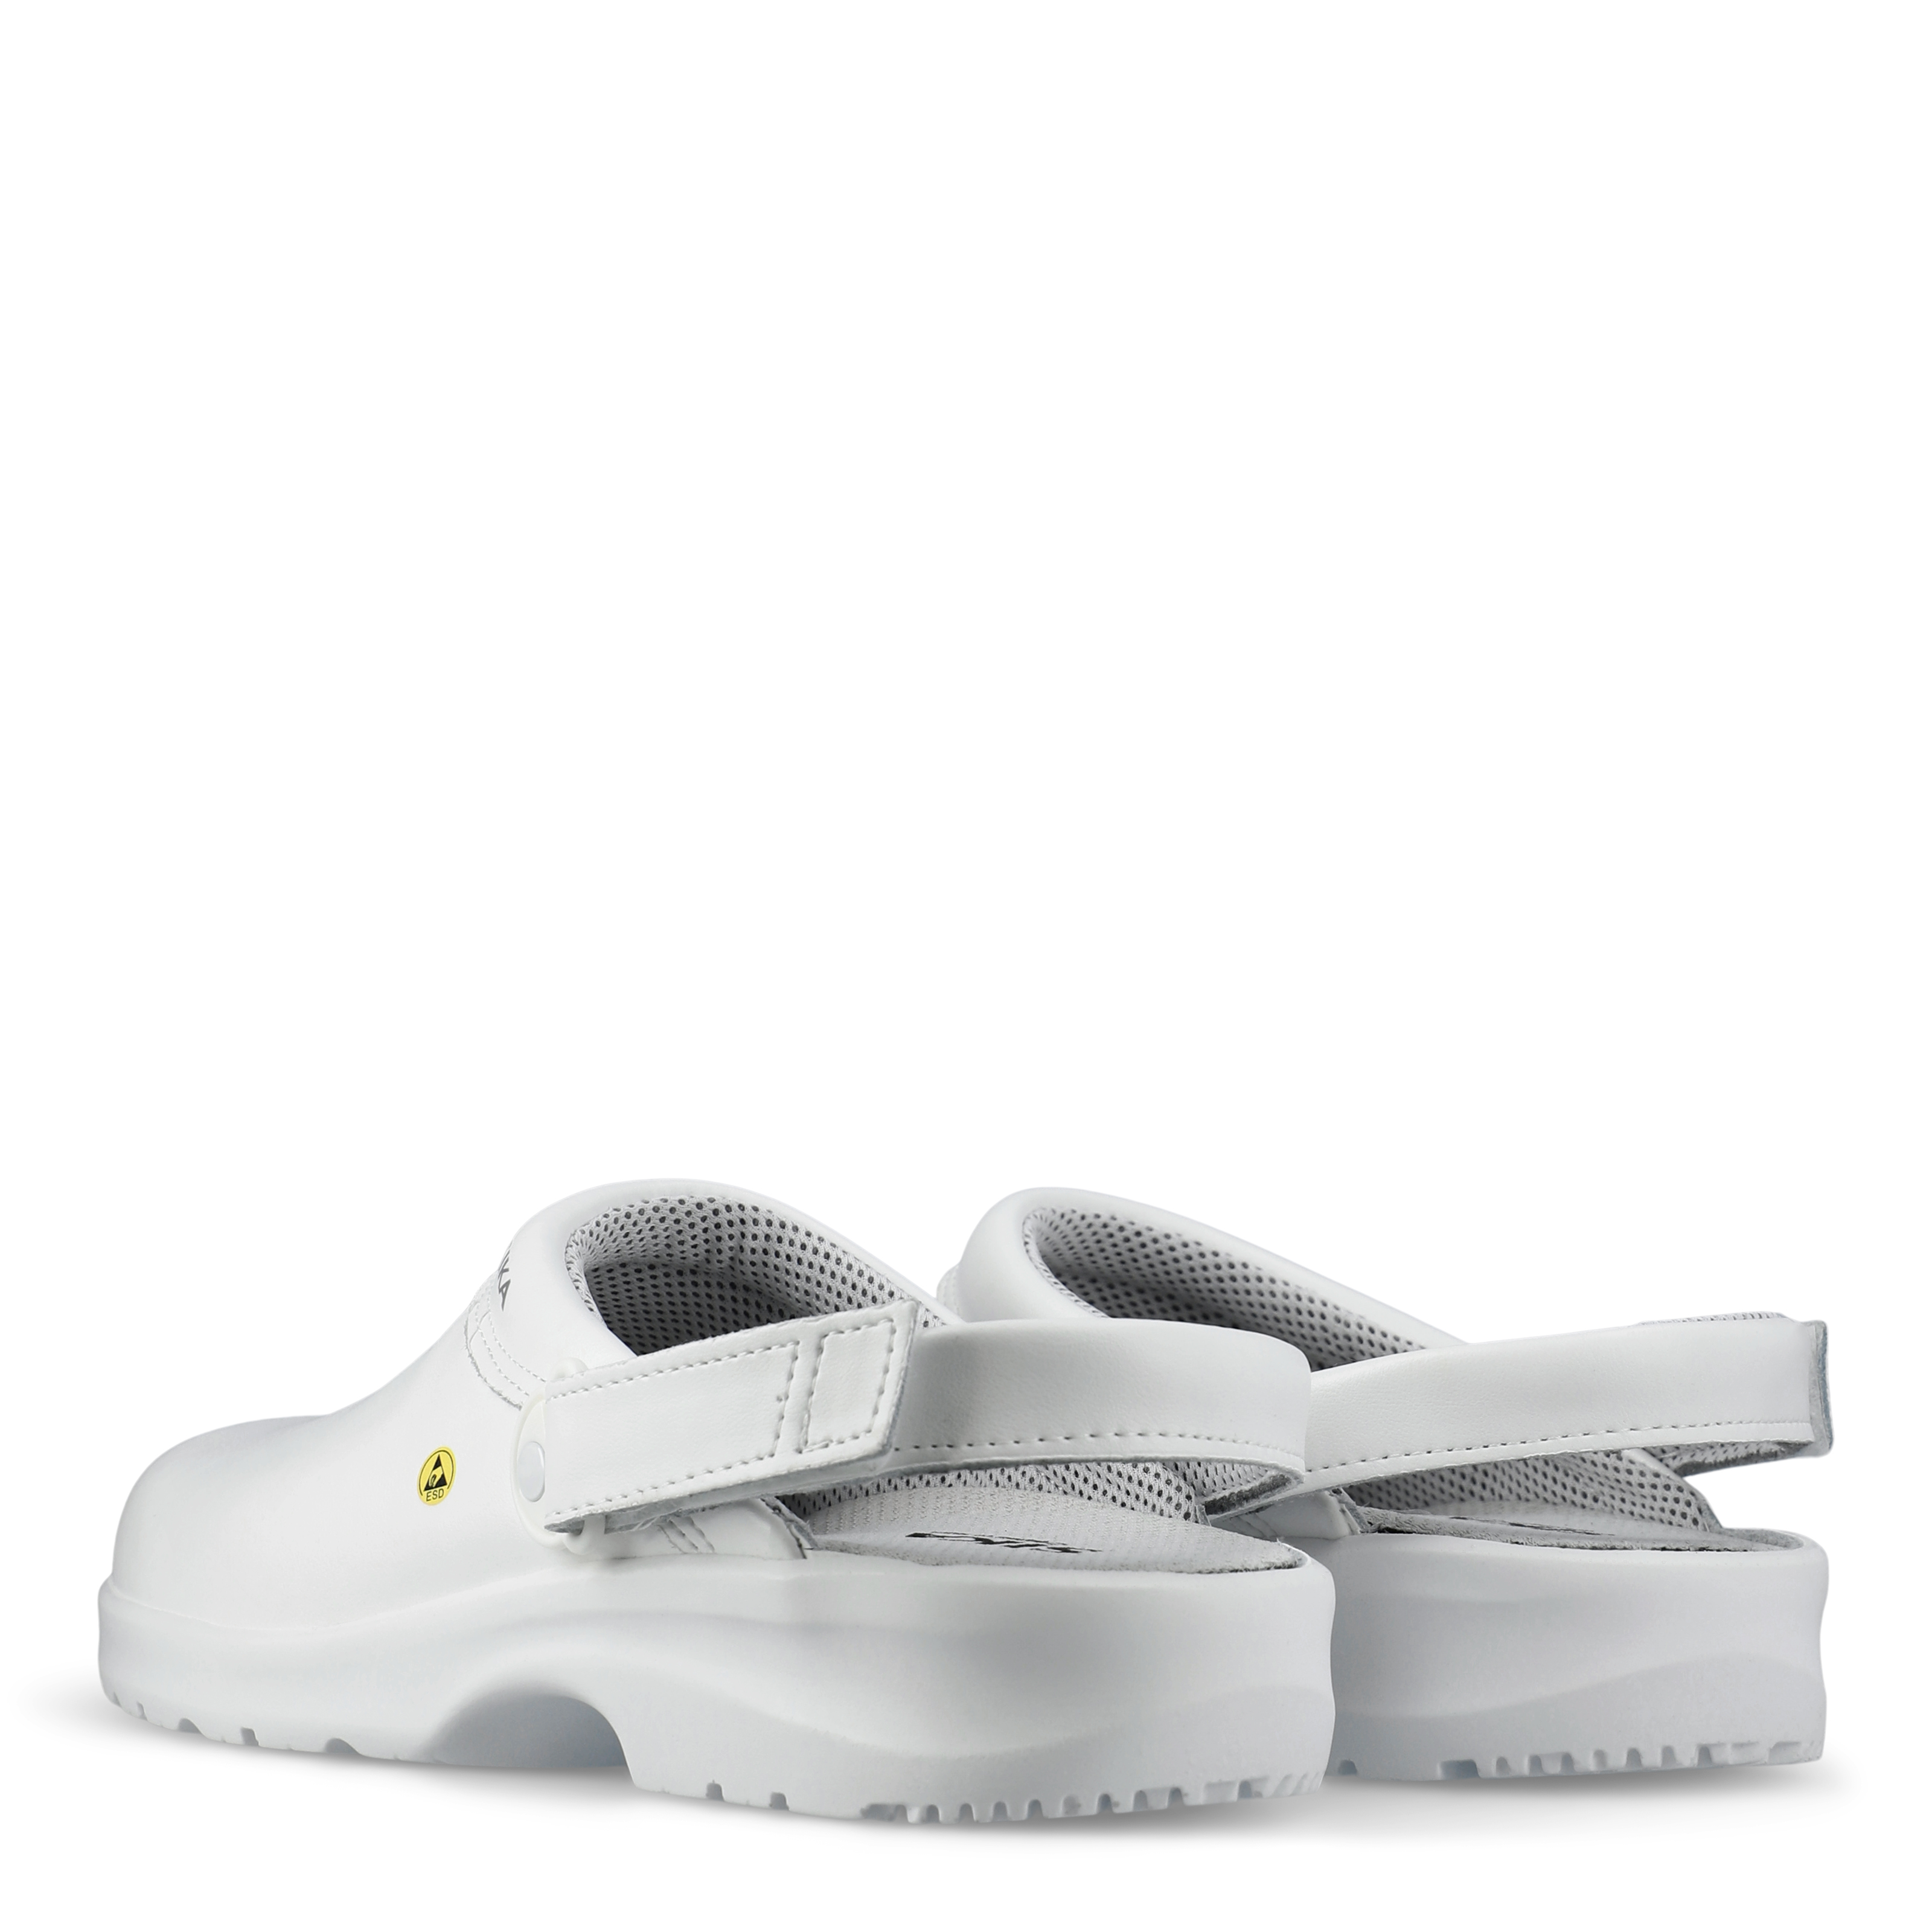 Sika Fusion Clog ESD weiss 19467